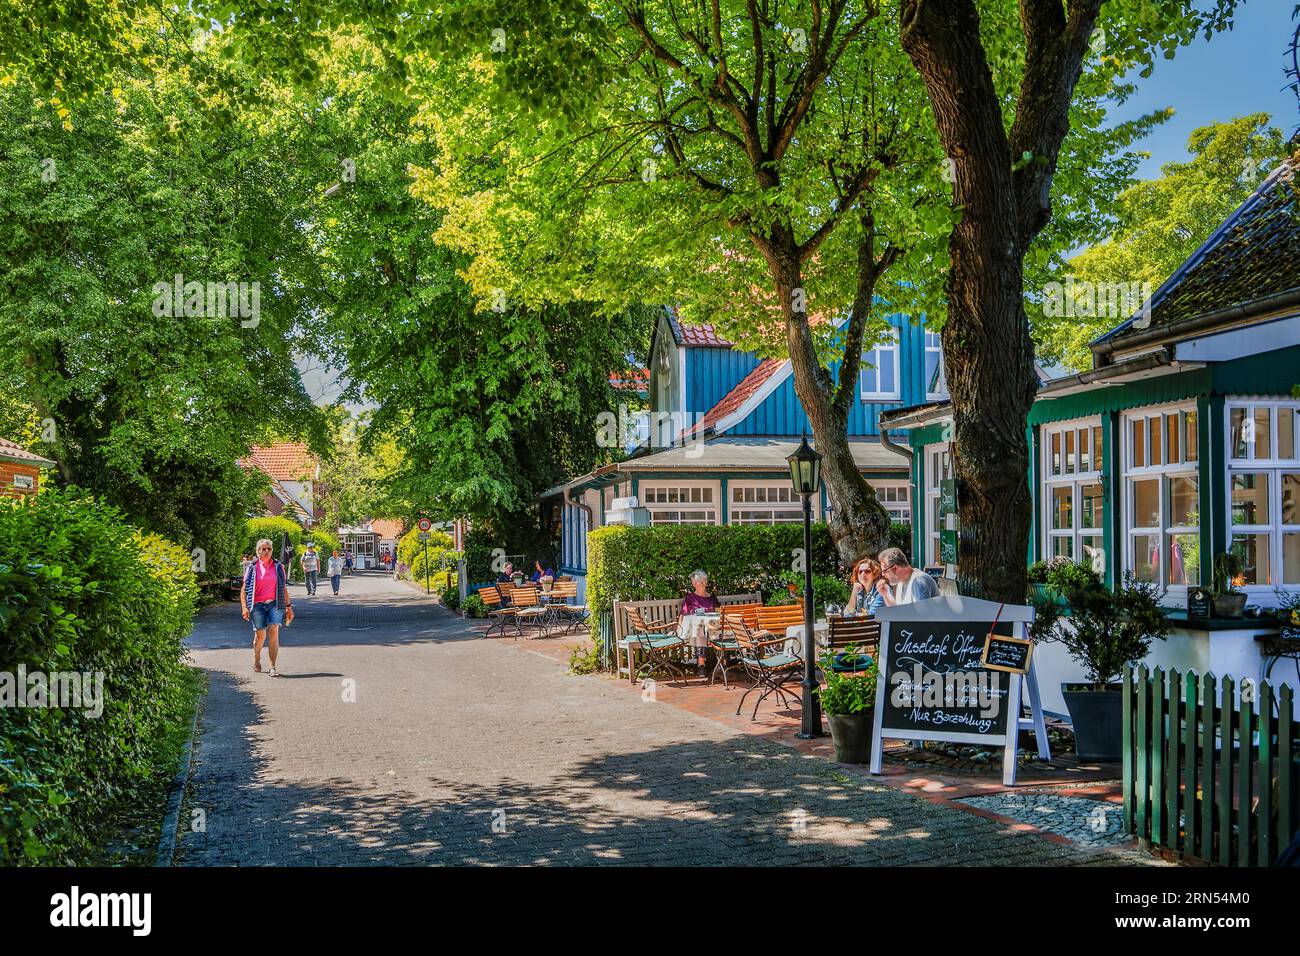 Main street in the village centre with typical verandas and tall trees, Spiekeroog, North Sea spa, North Sea island, East Frisian Islands, Lower Stock Photo